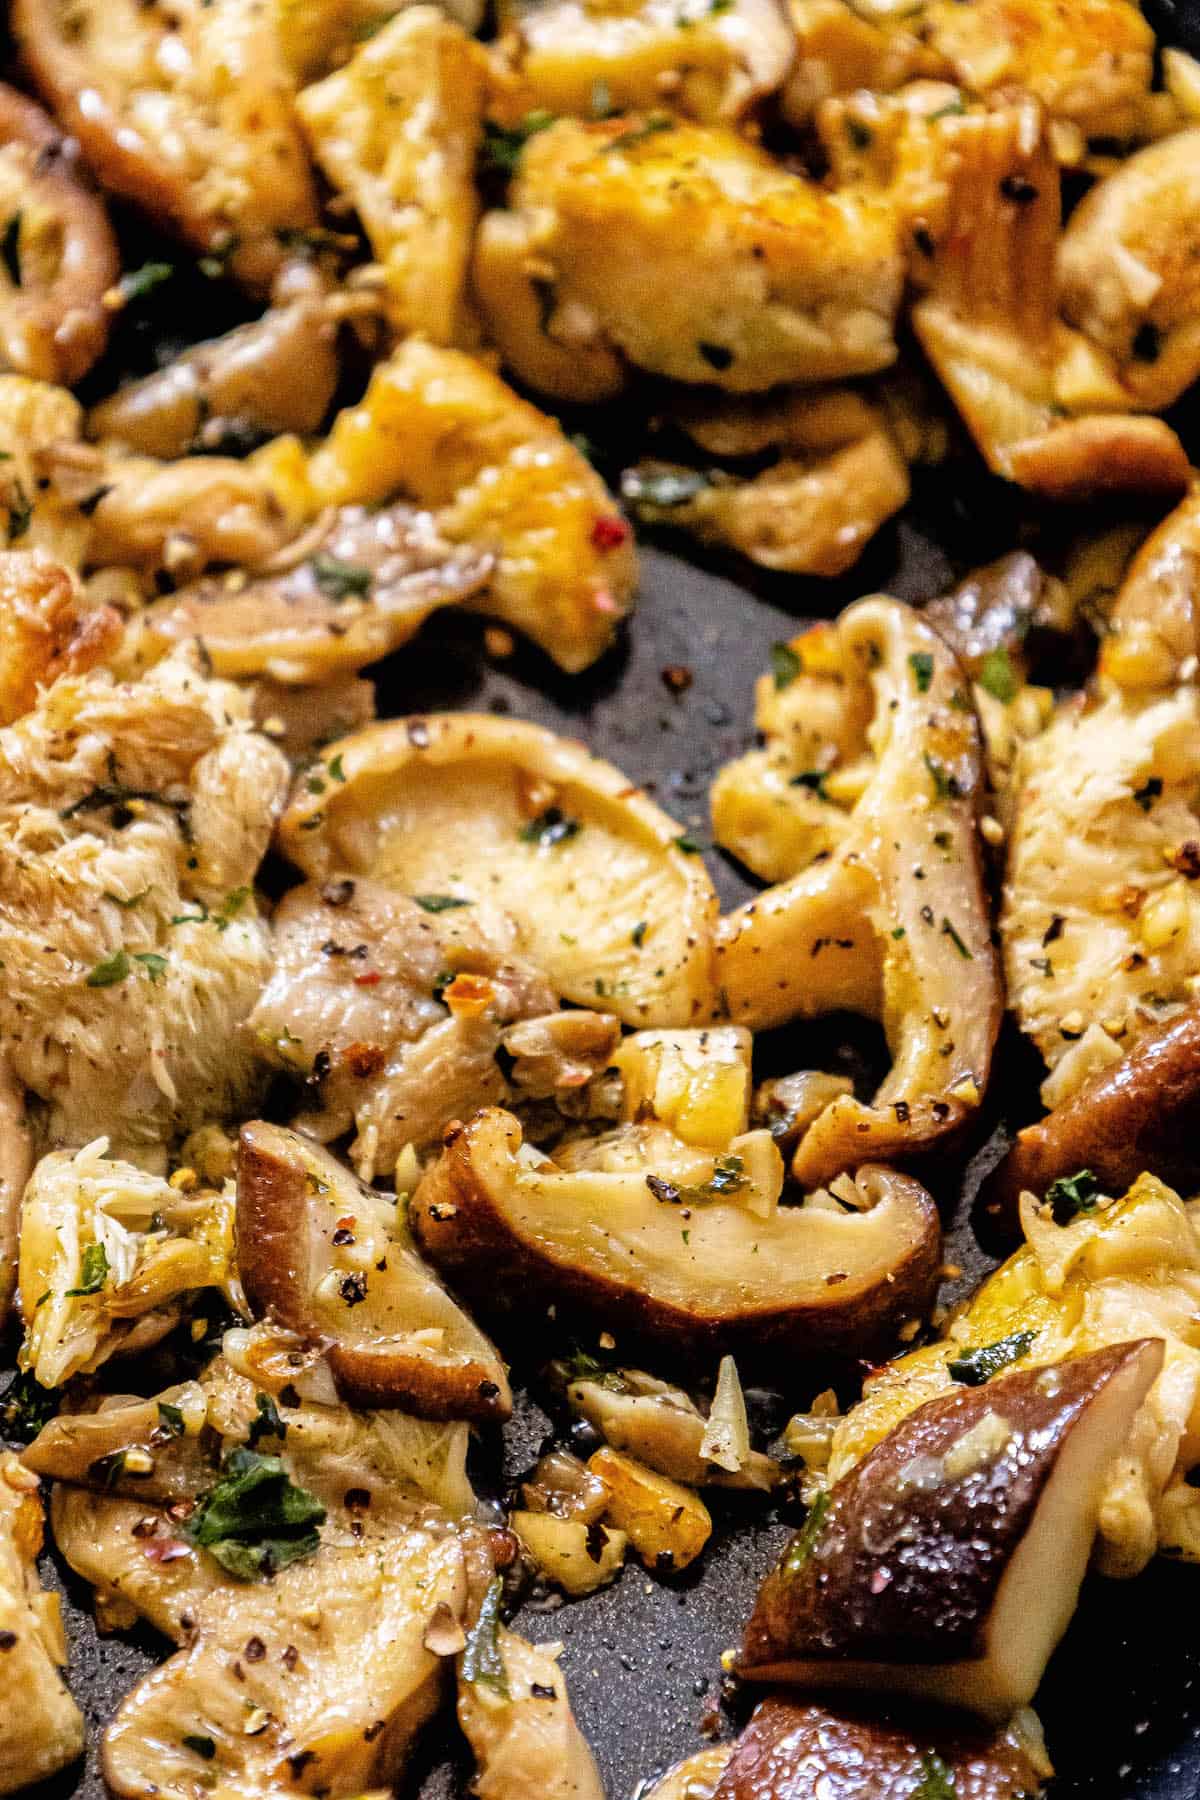 Chicken and mushrooms in a skillet, served with sauteed mushroom side dish.